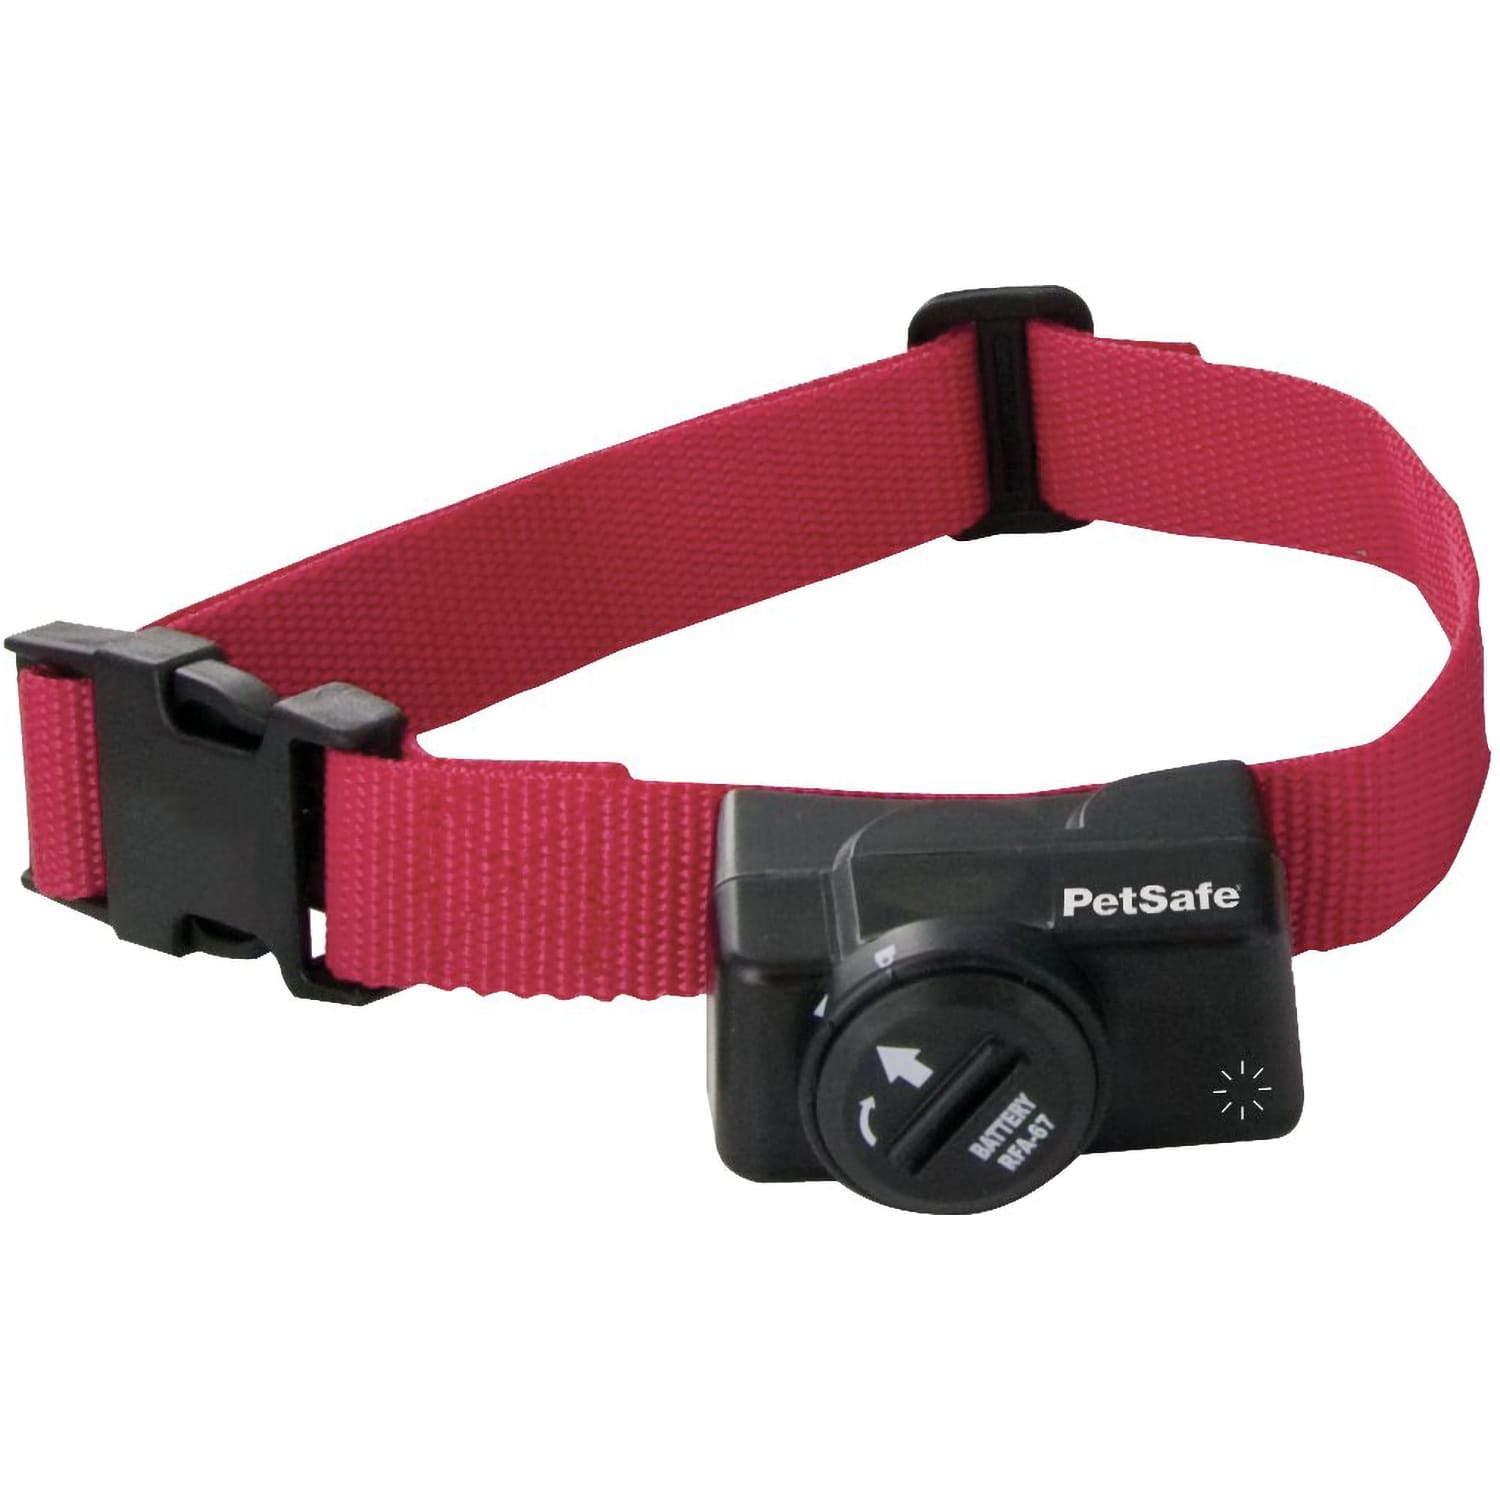 Bomgaars : PETSAFE Stay & Play Compact Wireless Fence : Wireless Pet  Containment